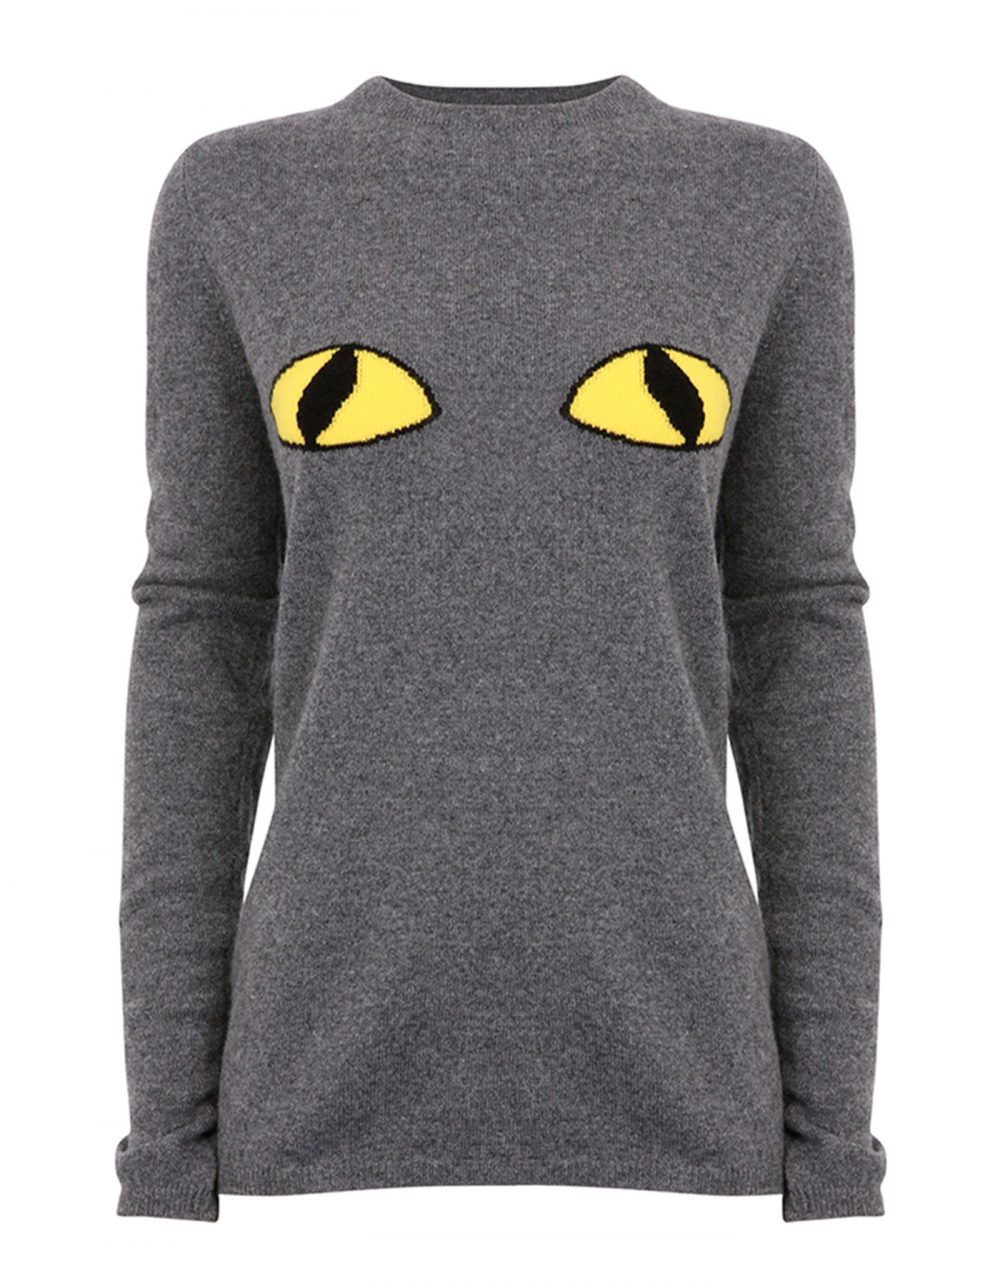 Studio photo of the malin darlin Cats Eyes cashmere jumper, pictured flat on a white background.